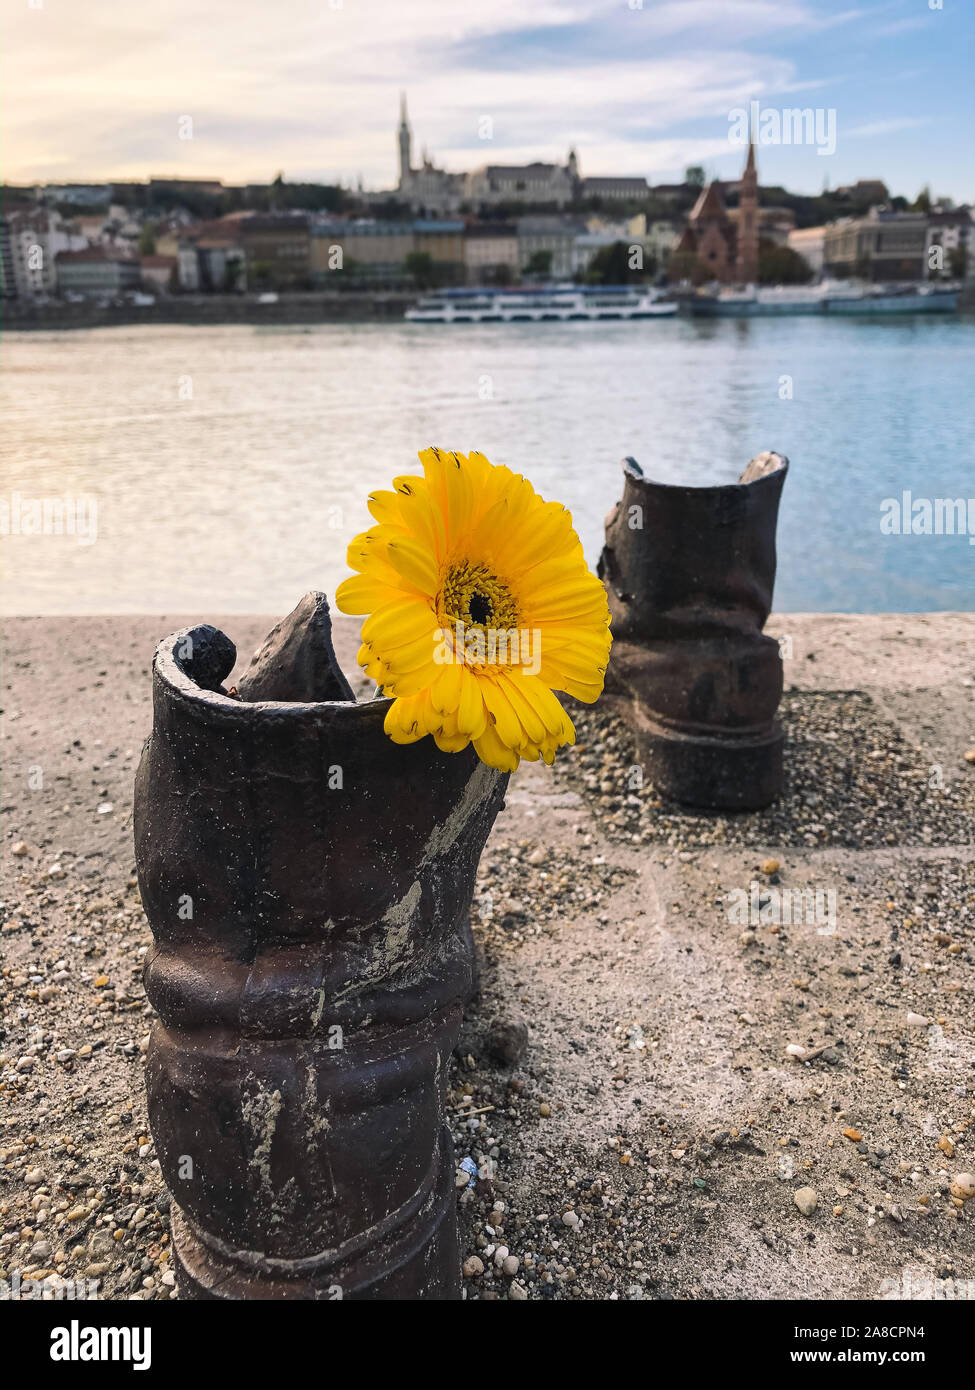 Budapest, Hungary - Nov 6, 2019: Shoes on the Danube Bank. Monument to honour the Jews who were killed by fascists during World War II. Iron shoes with yellow flower. Blurred city in the background. Stock Photo